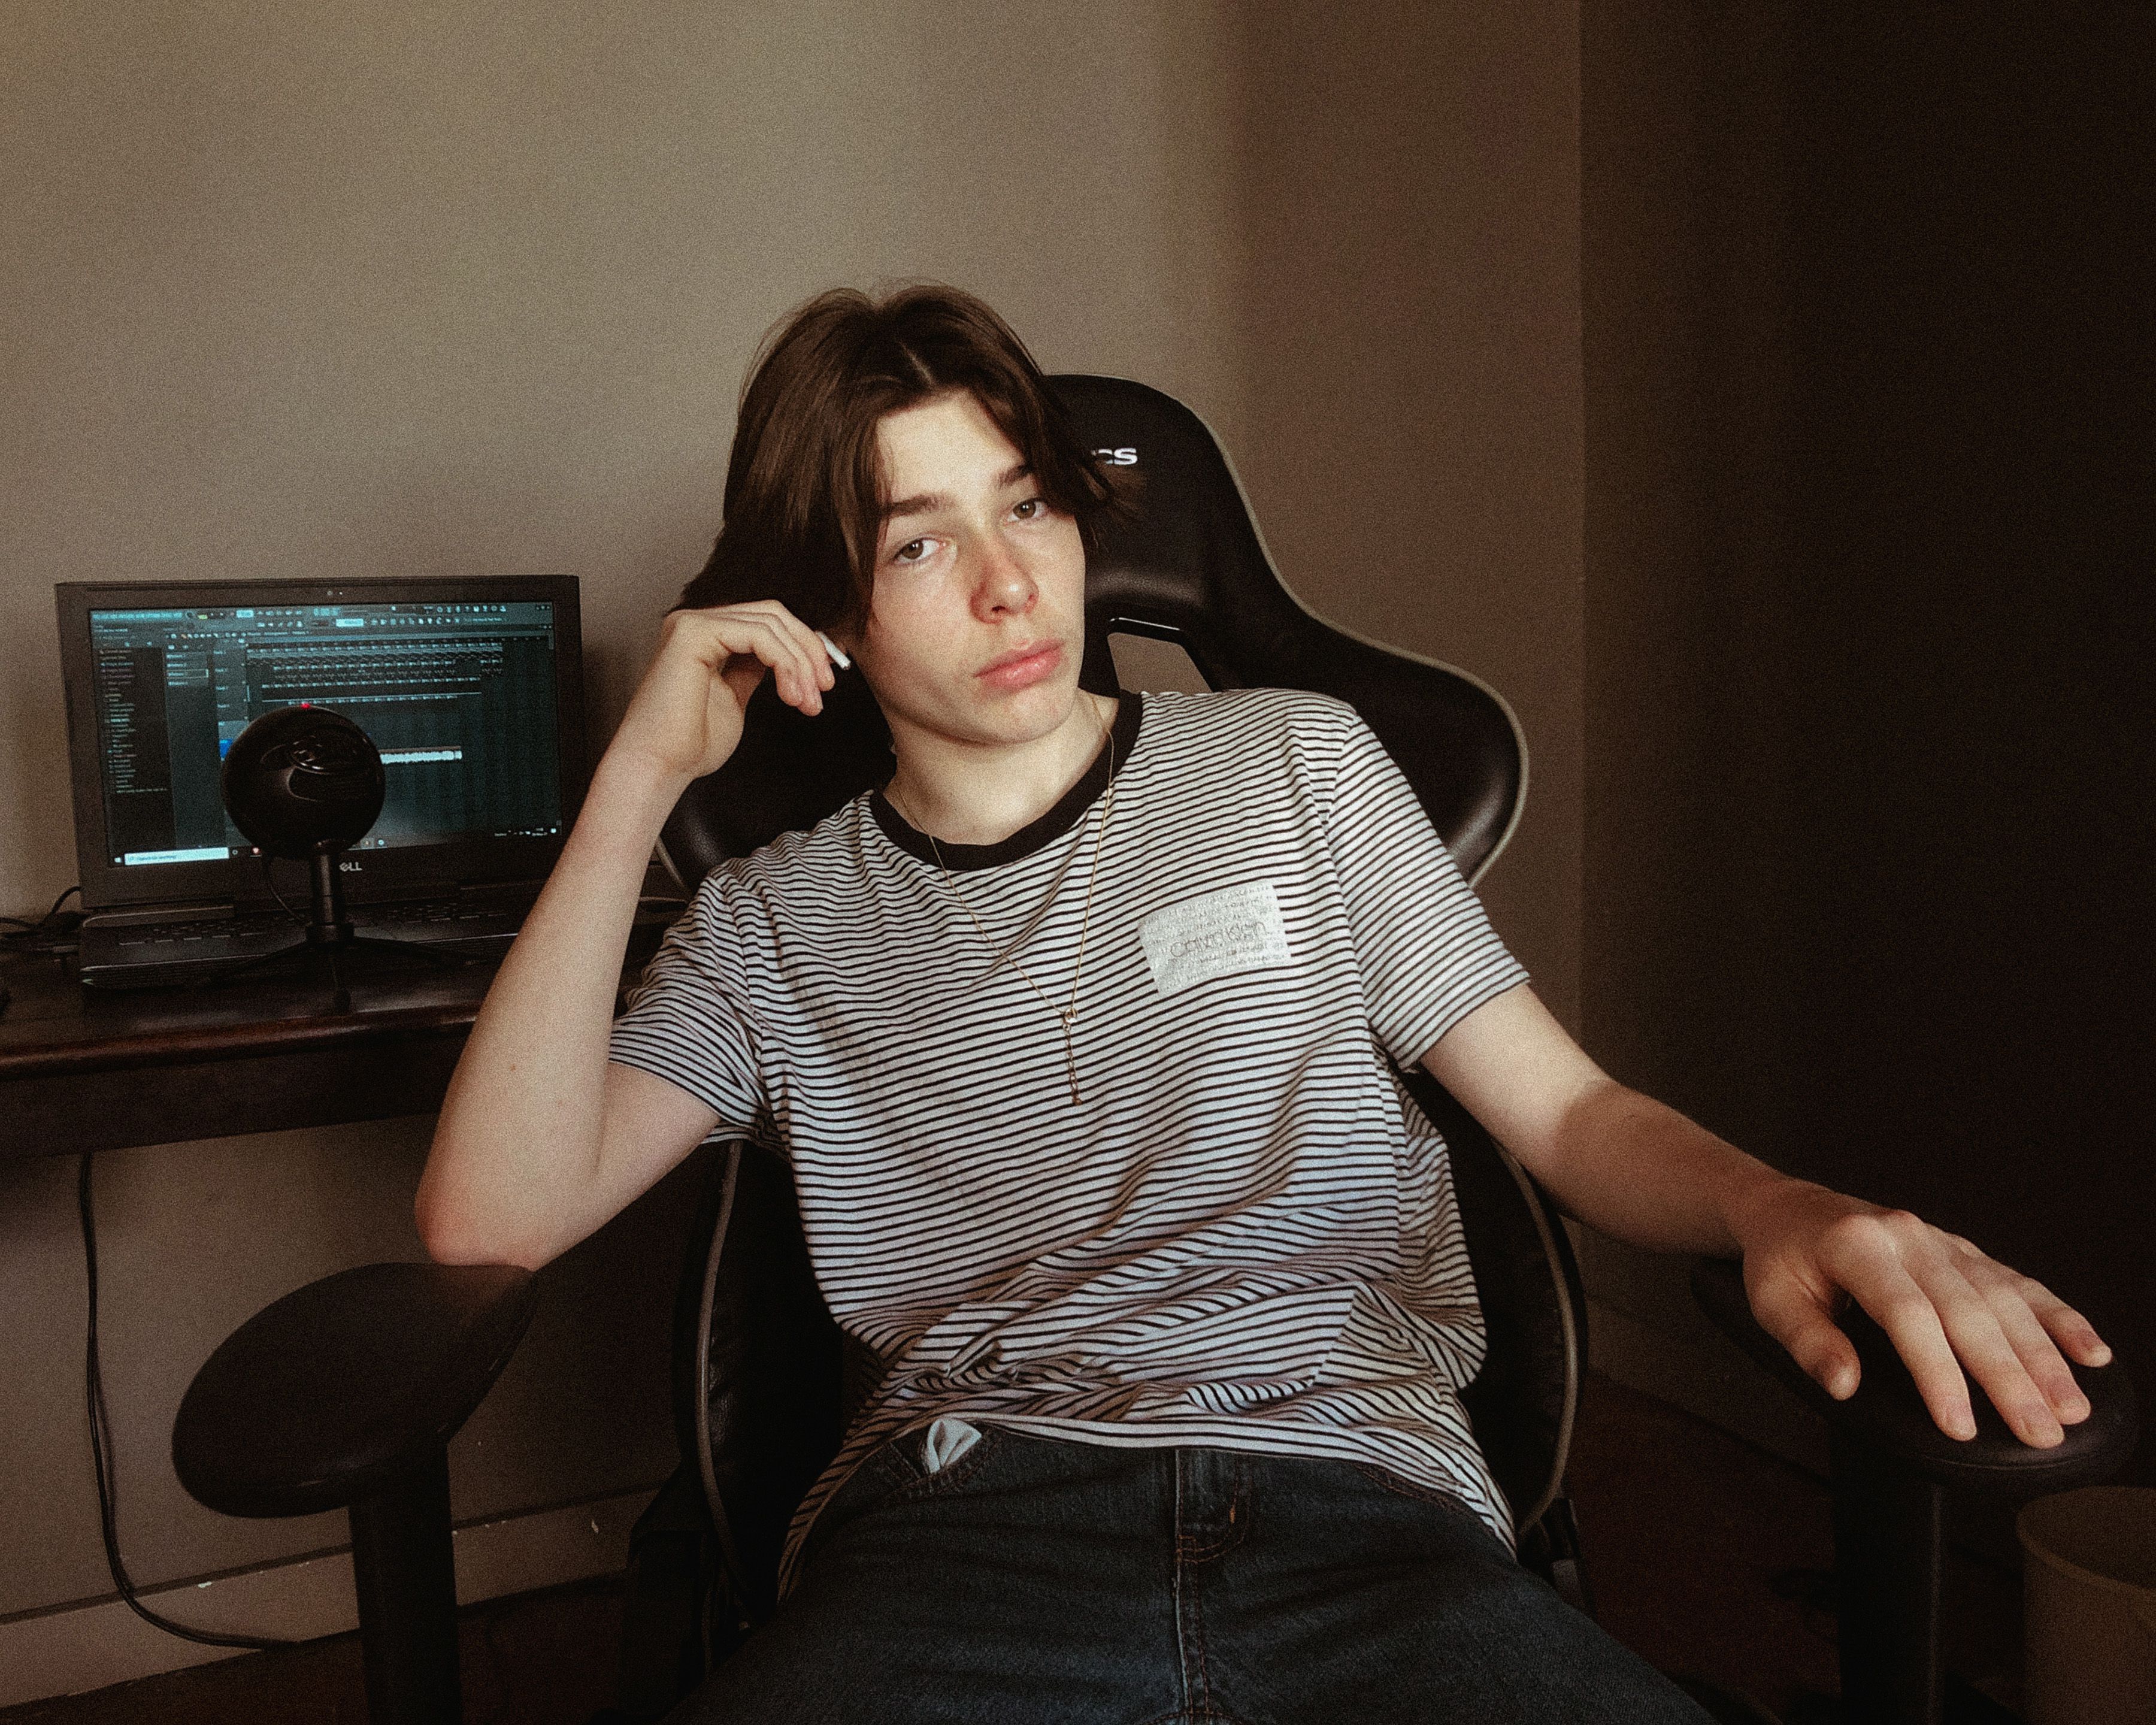 The 15-year-old musician Odin, known as lungskull, at his home in Paris, May 9, 2021. “When I wasn’t that known, I thought it was crazy that people would play my music on Roblox,” he said. (Matthew Avignone/The New York Times)